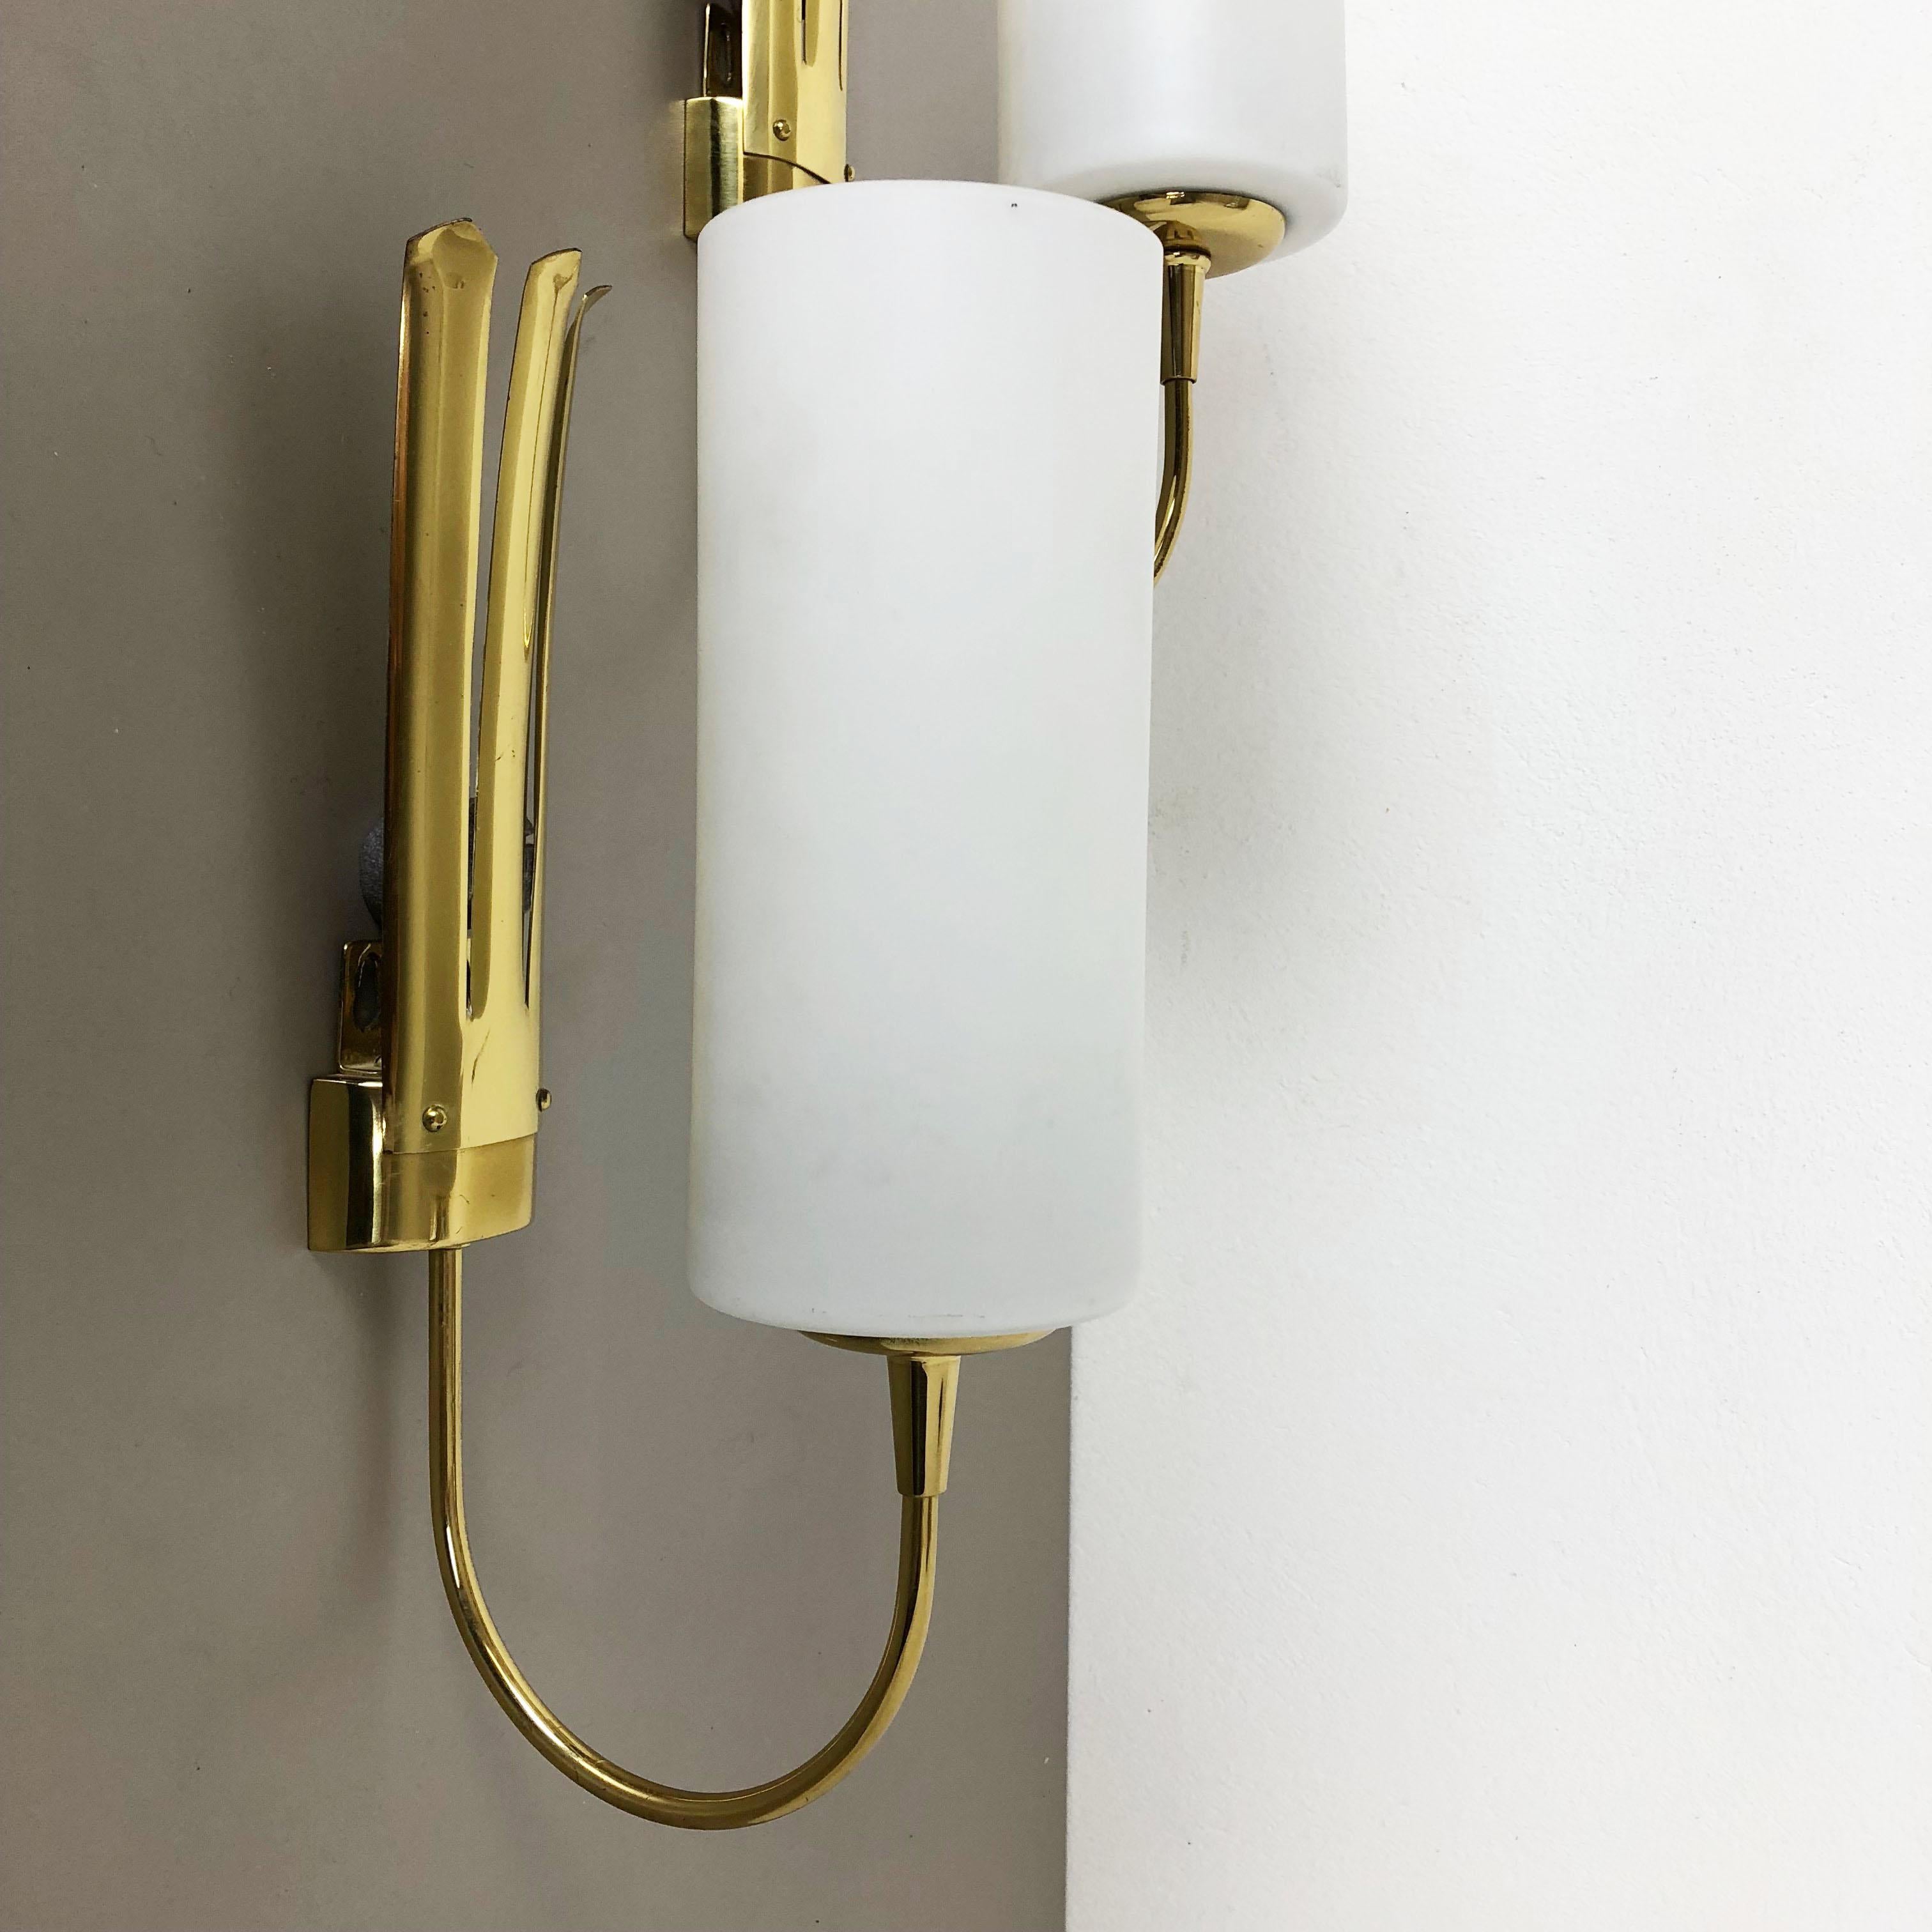 Set of Two Stilnovo Style Brass Italian Wall Lights Sconces, Italy, 1950s For Sale 6